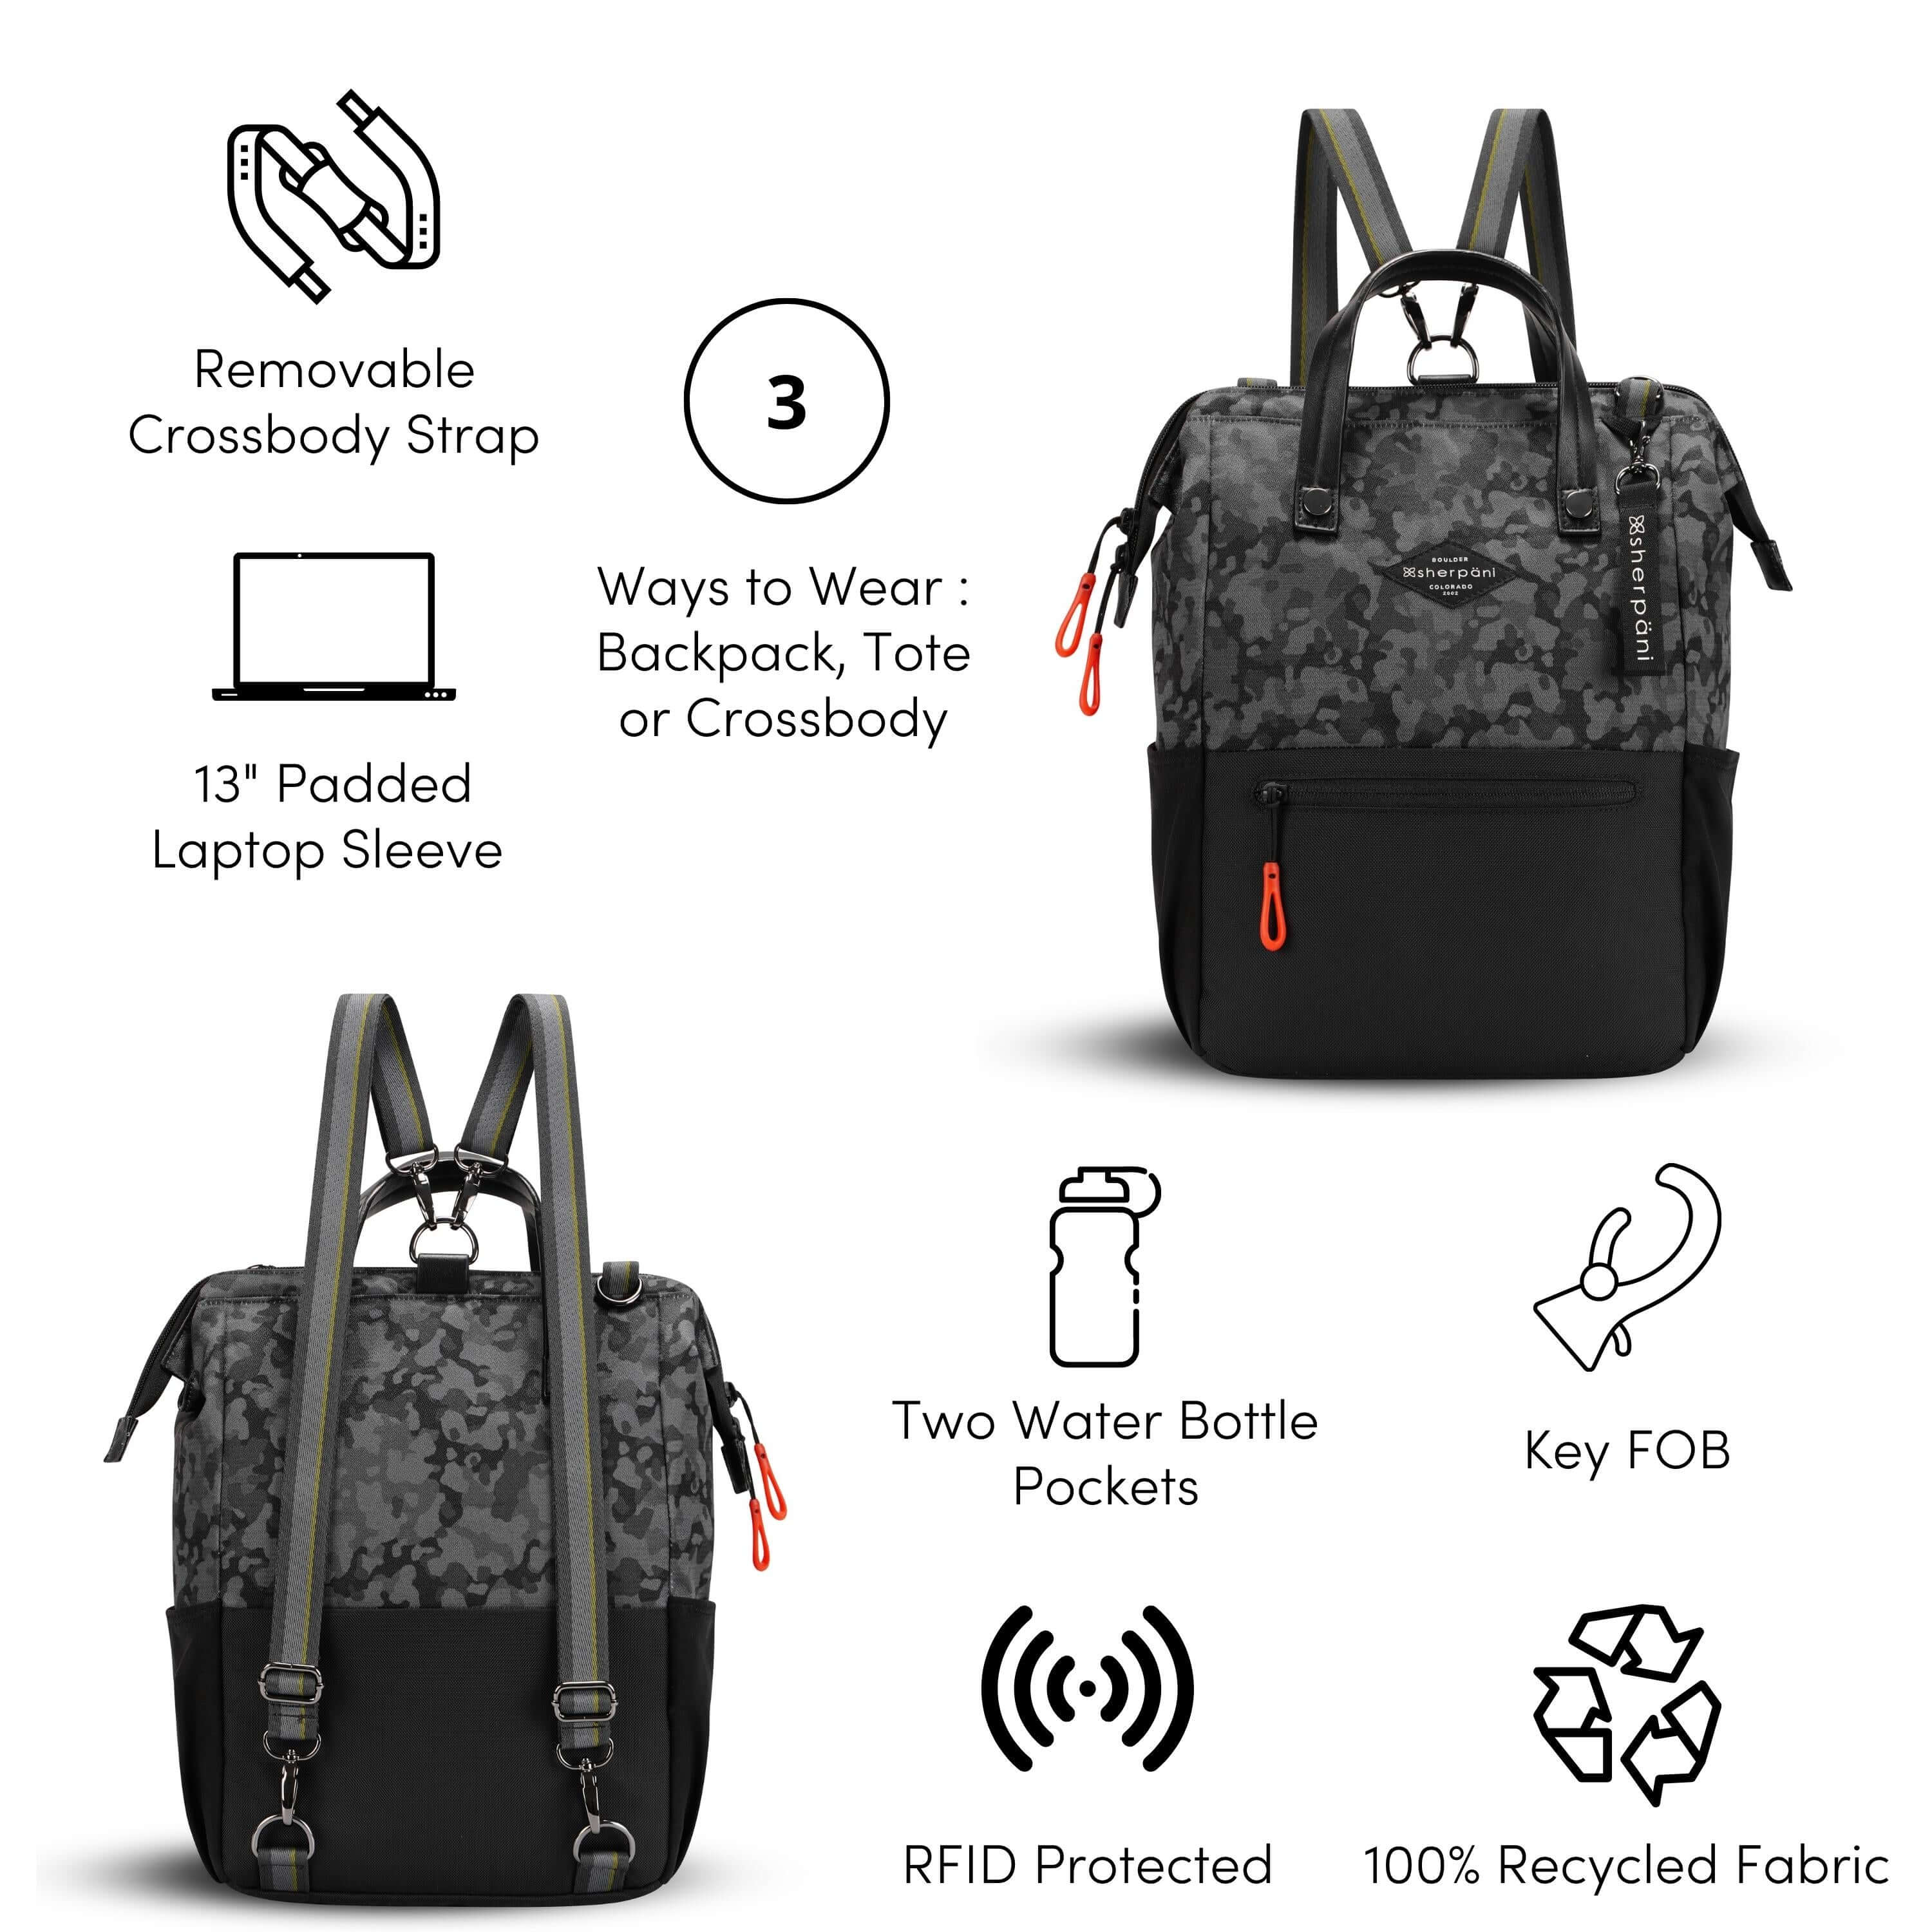 A Graphic showing the features of Sherpani’s crossbody, the Dispatch. There is a front and back view of the bag. The following features are highlighted with corresponding graphics: Removable Crossbody Strap, 13" Padded Laptop Sleeve, 3 Ways to Wear: Backpack, Tote or Crossbody, Two Water Bottle Pockets, Key FOB, RFID Protected, 100% Recycled Fabric. 